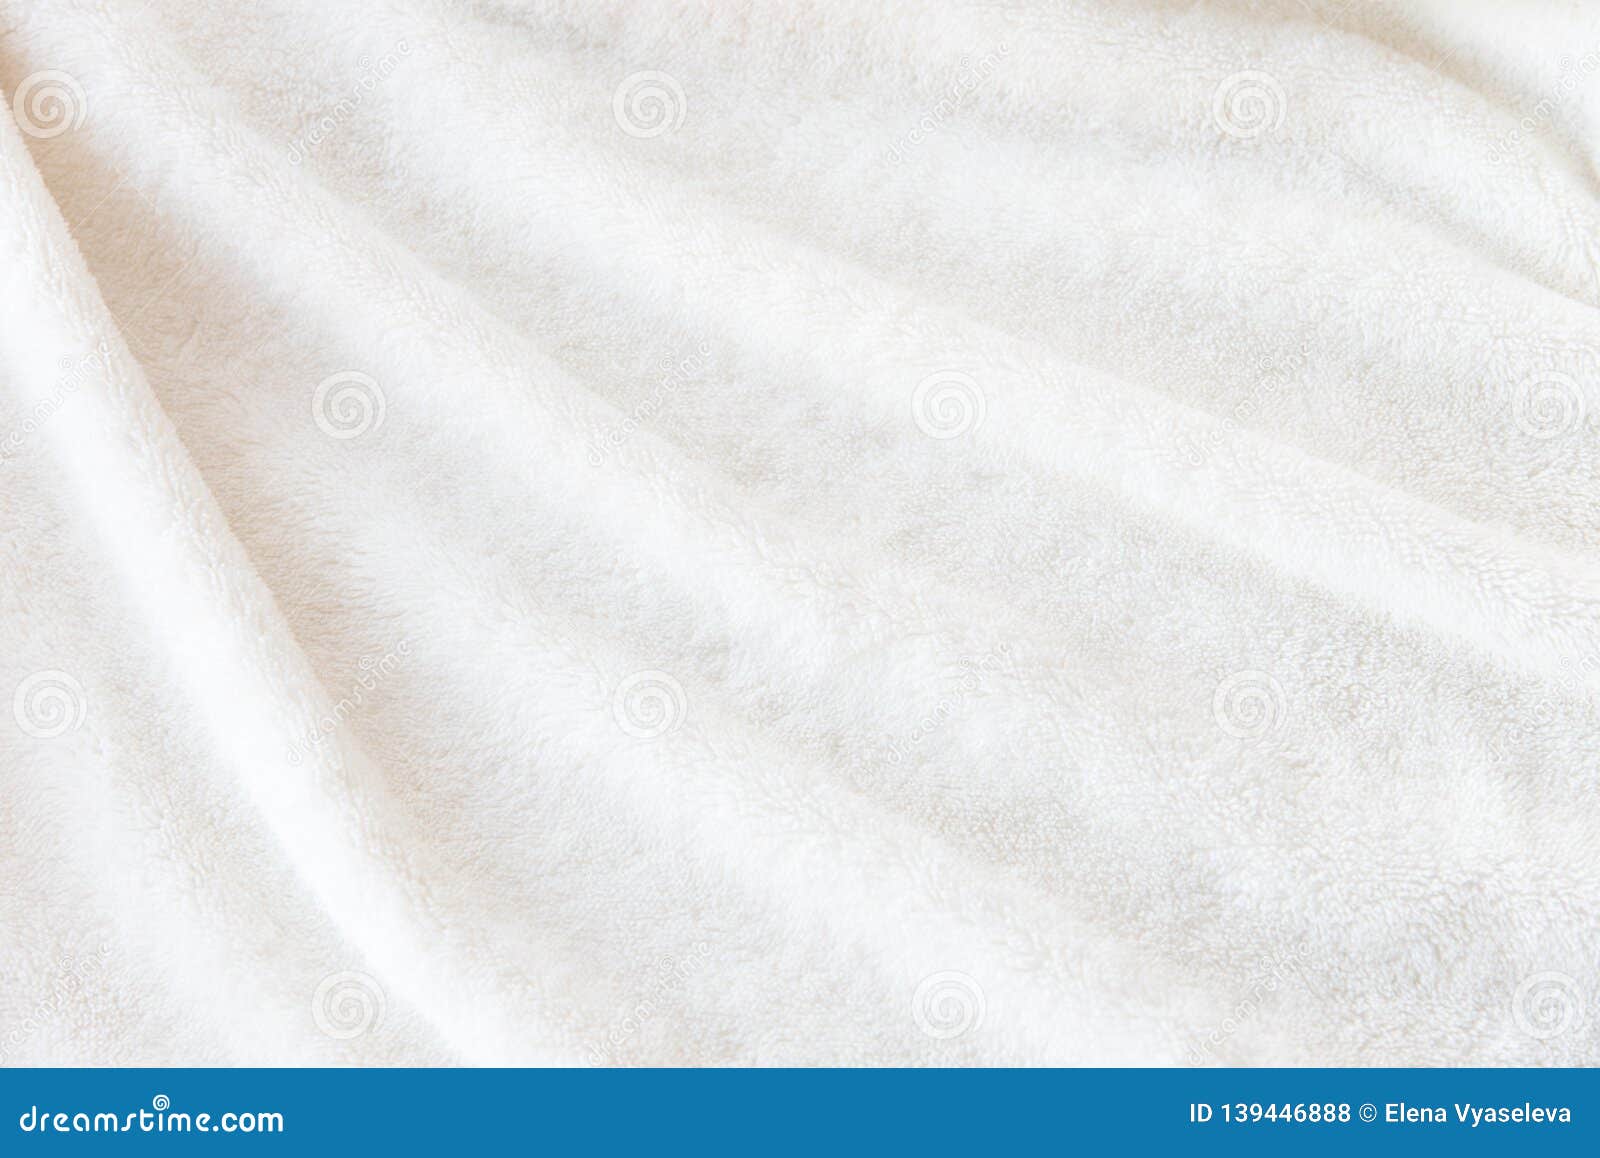 White Delicate Soft Background of Plush Fabric Stock Photo - Image of fleece,  space: 139446888